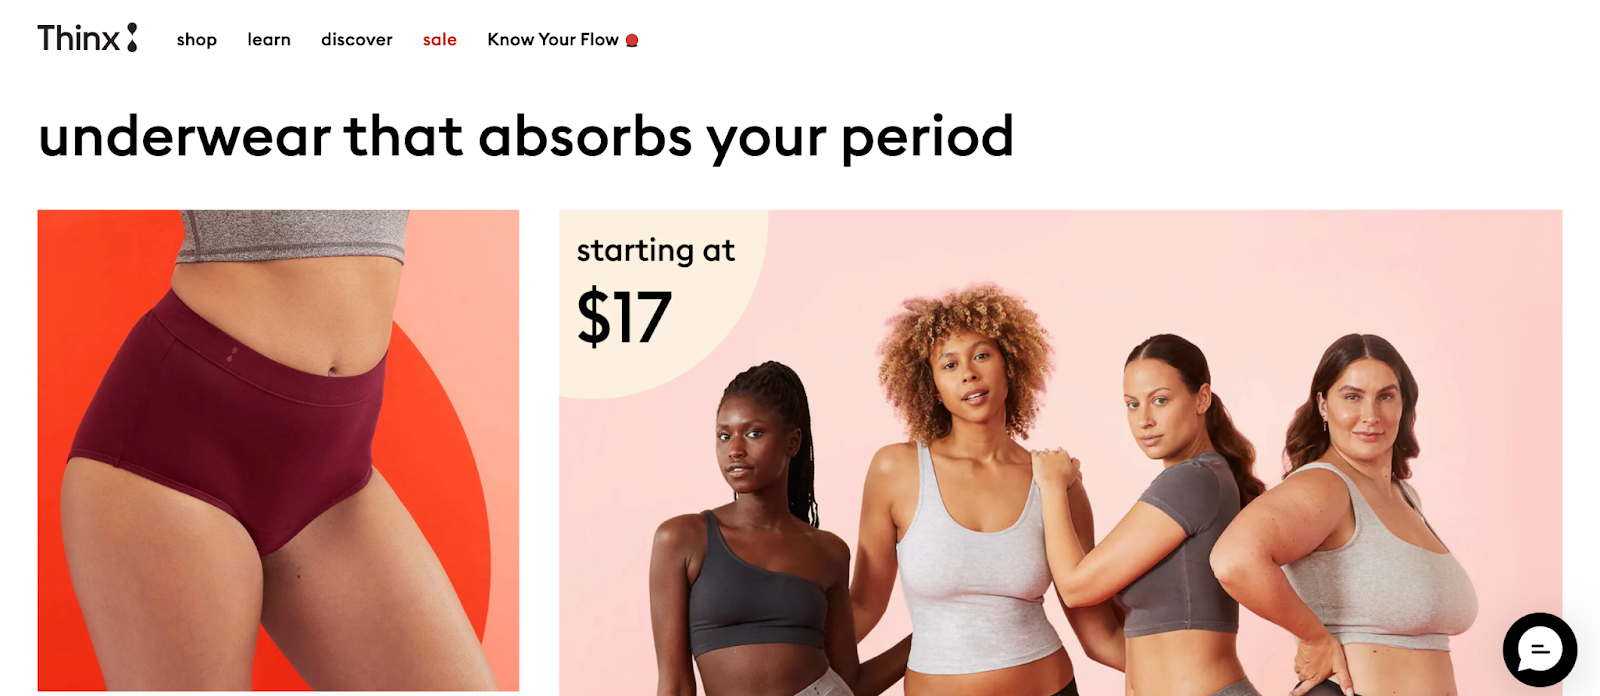 Models wearing Thinx underwear next to a close-up image of the underwear, along with pricing information.